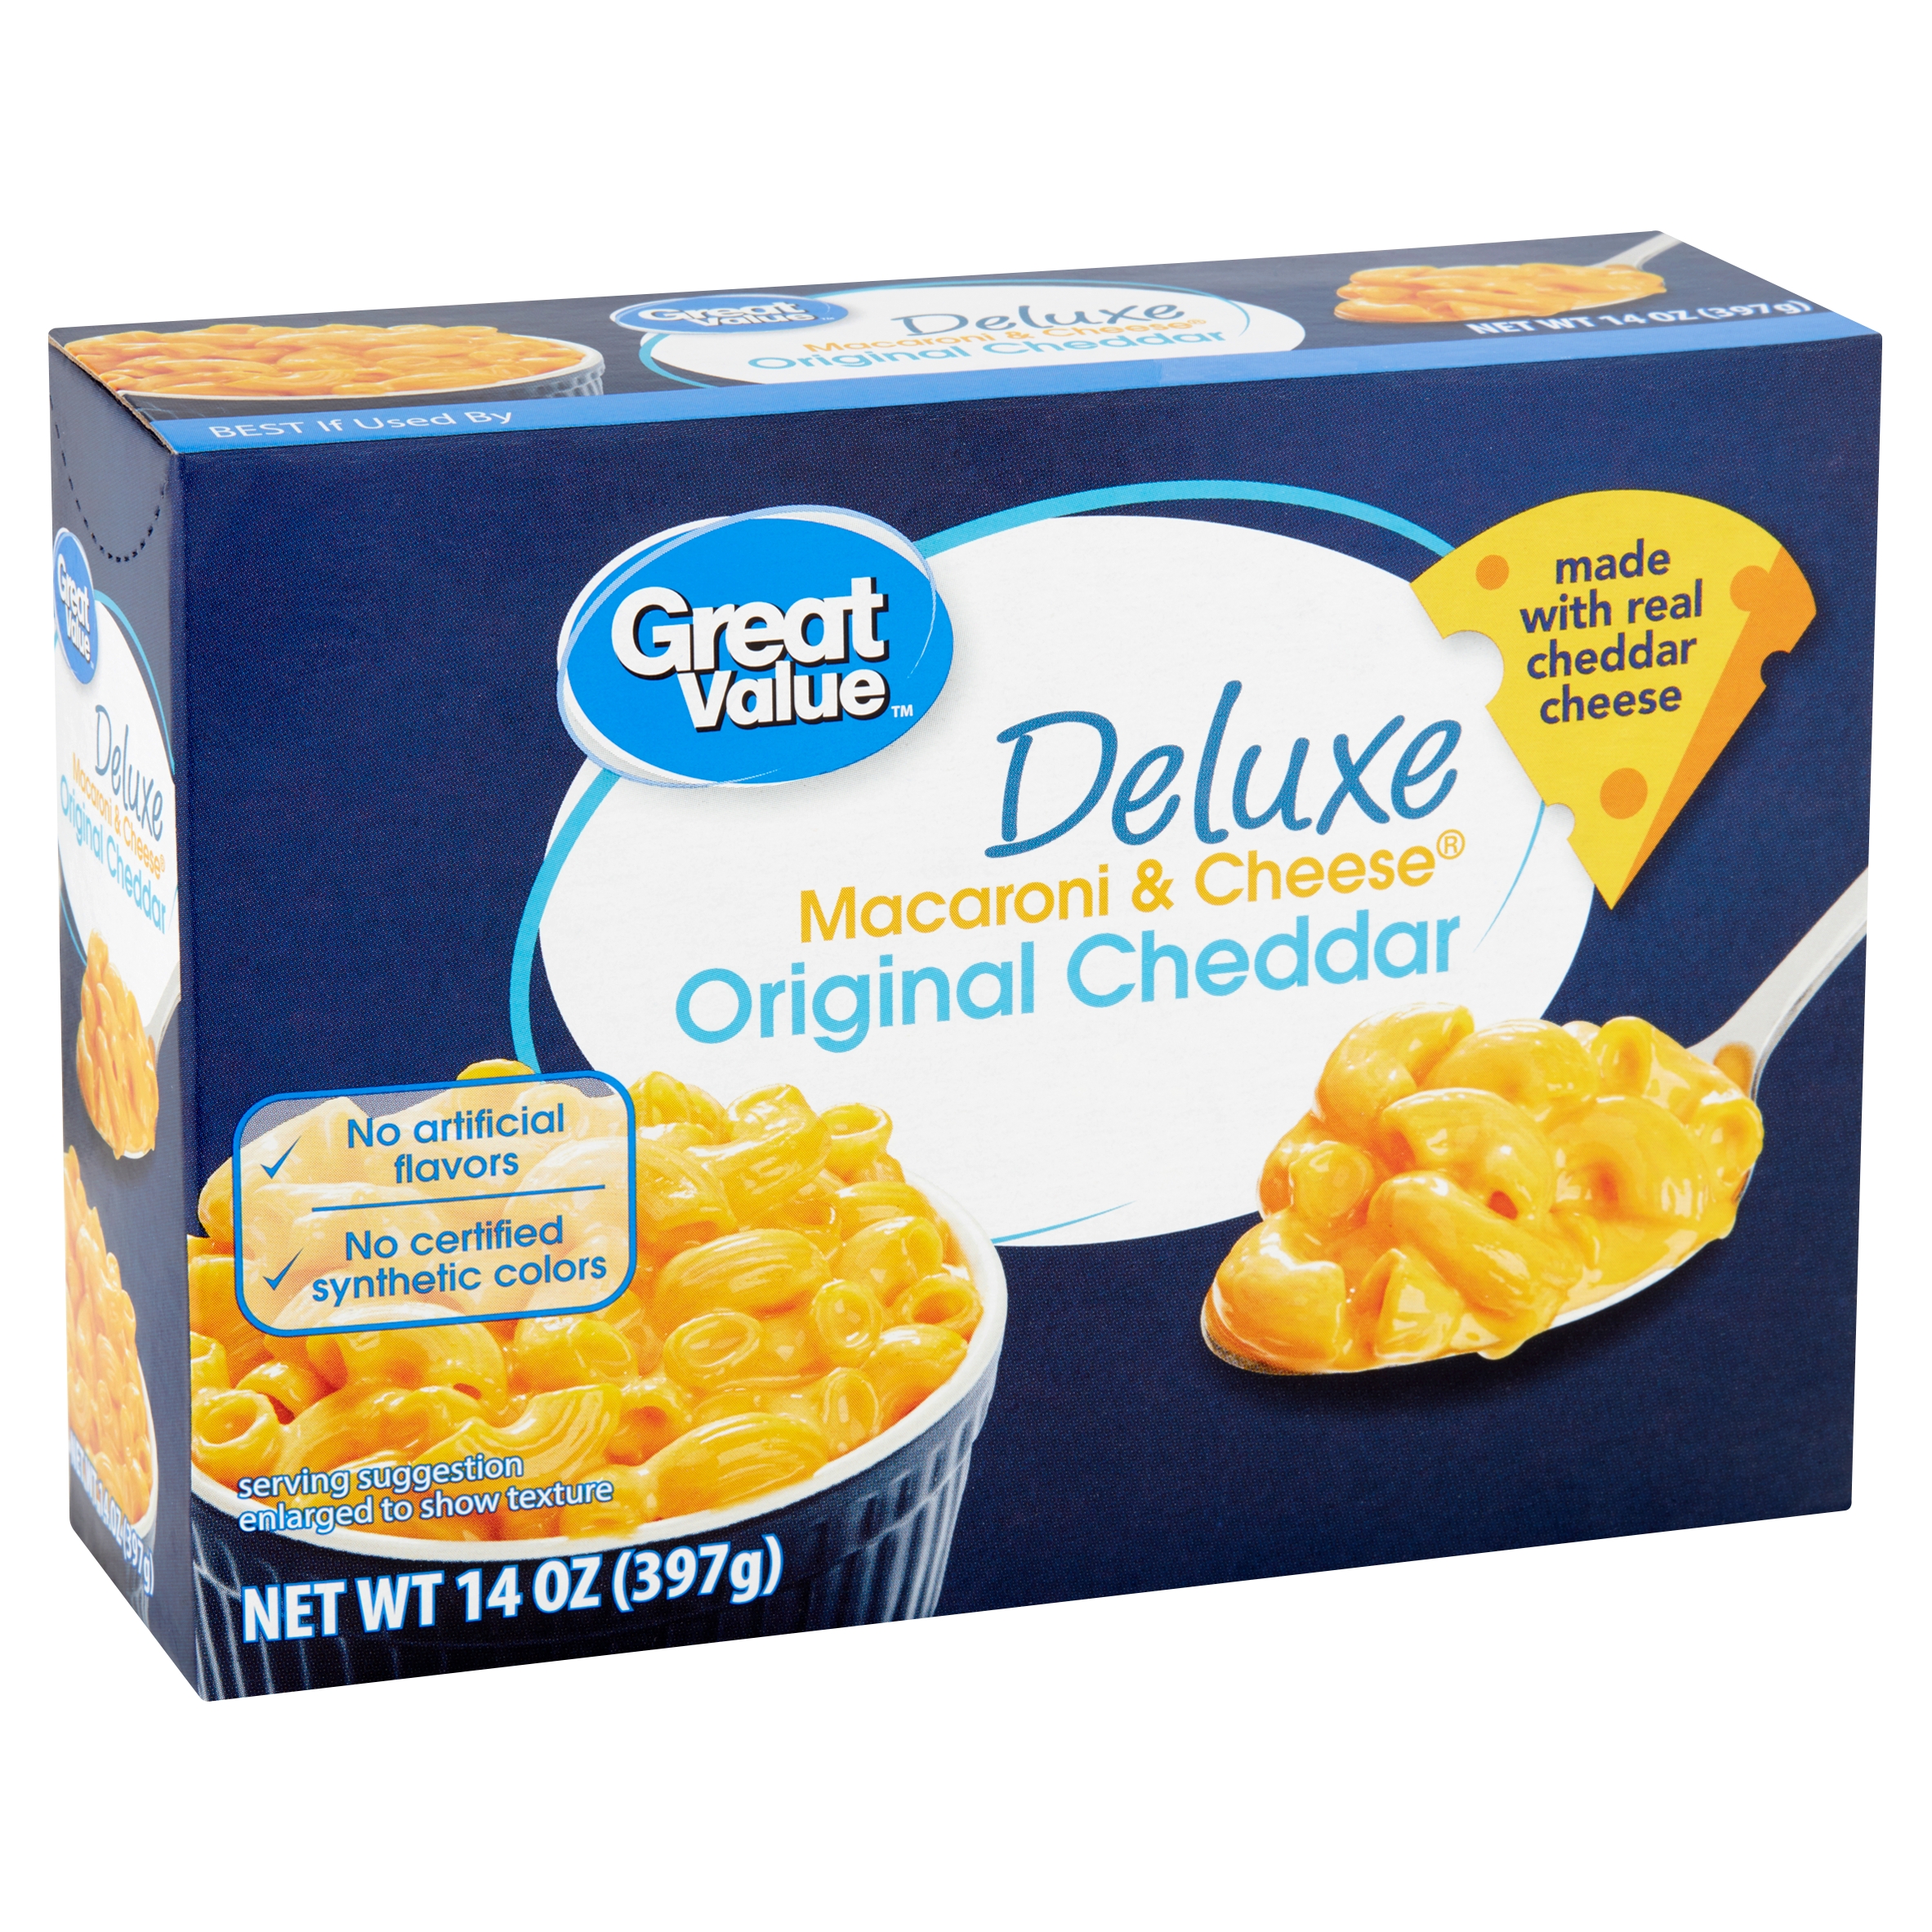 Great Value Deluxe Original Cheddar Macaroni & Cheese, 14 Oz Image